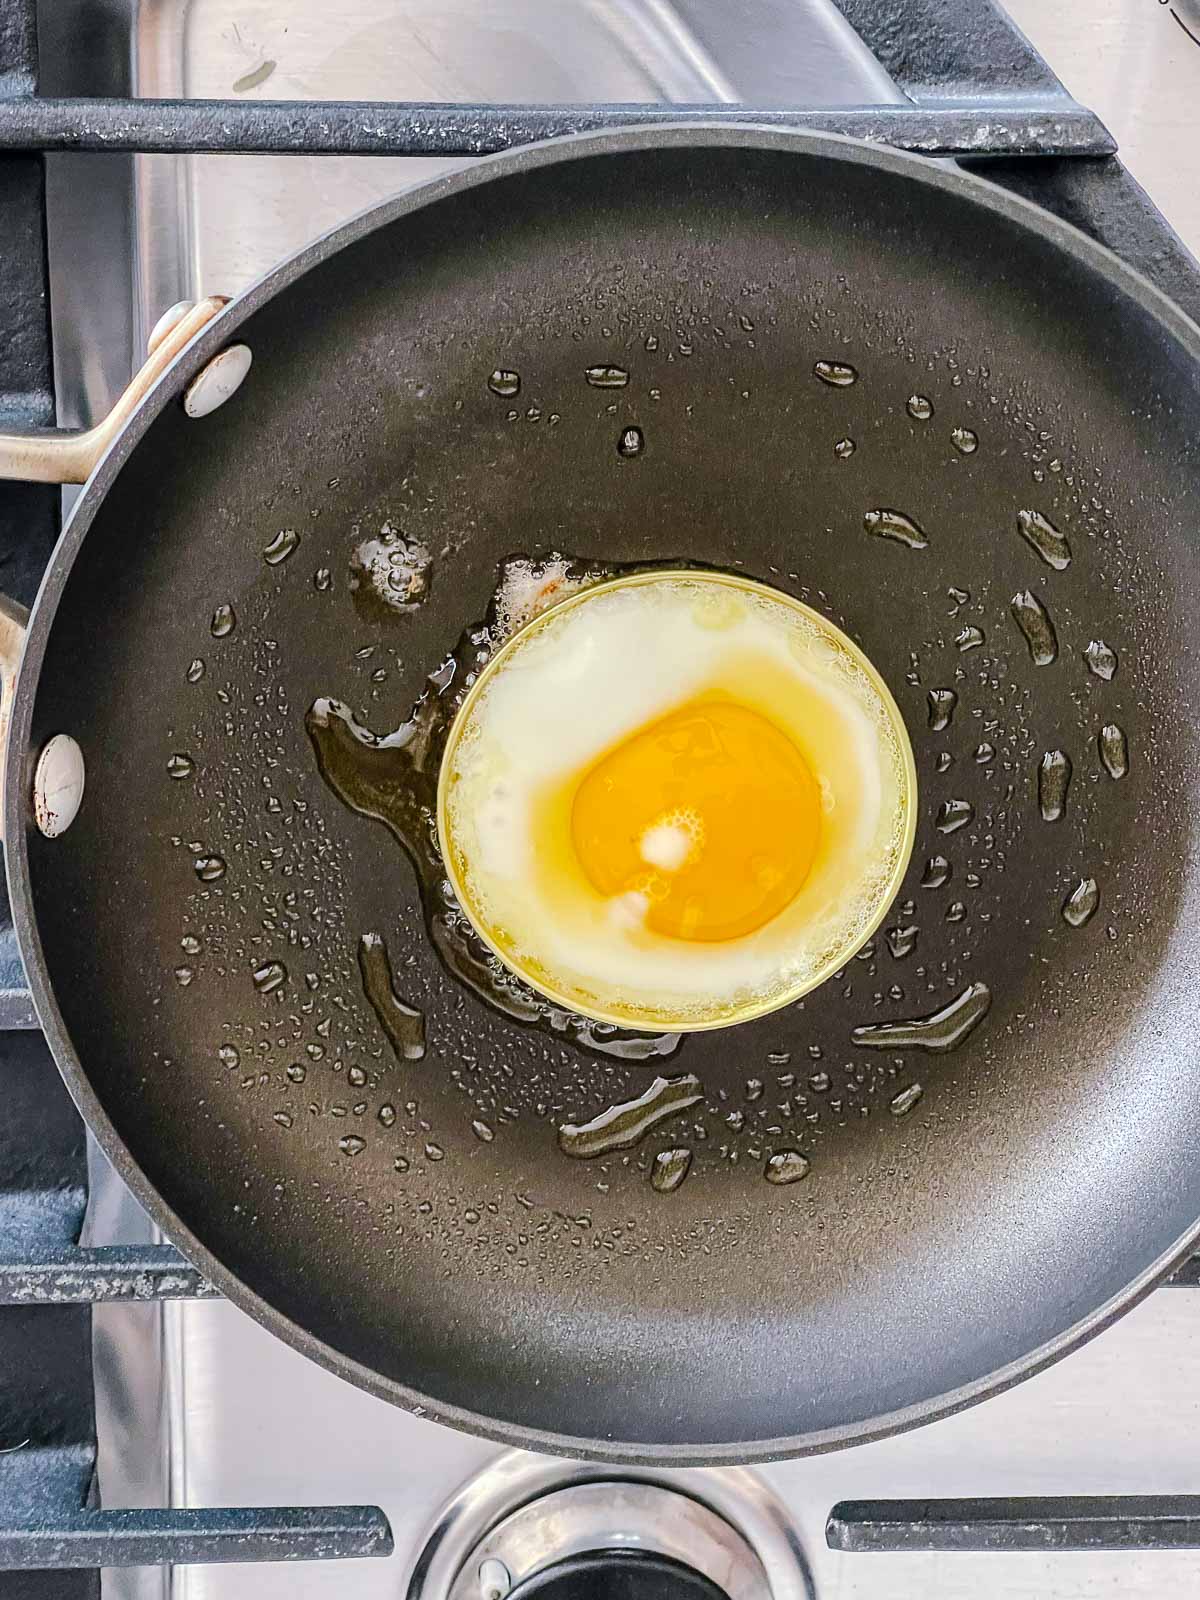 A round runny egg cooked in a frying pan on top of a stove.